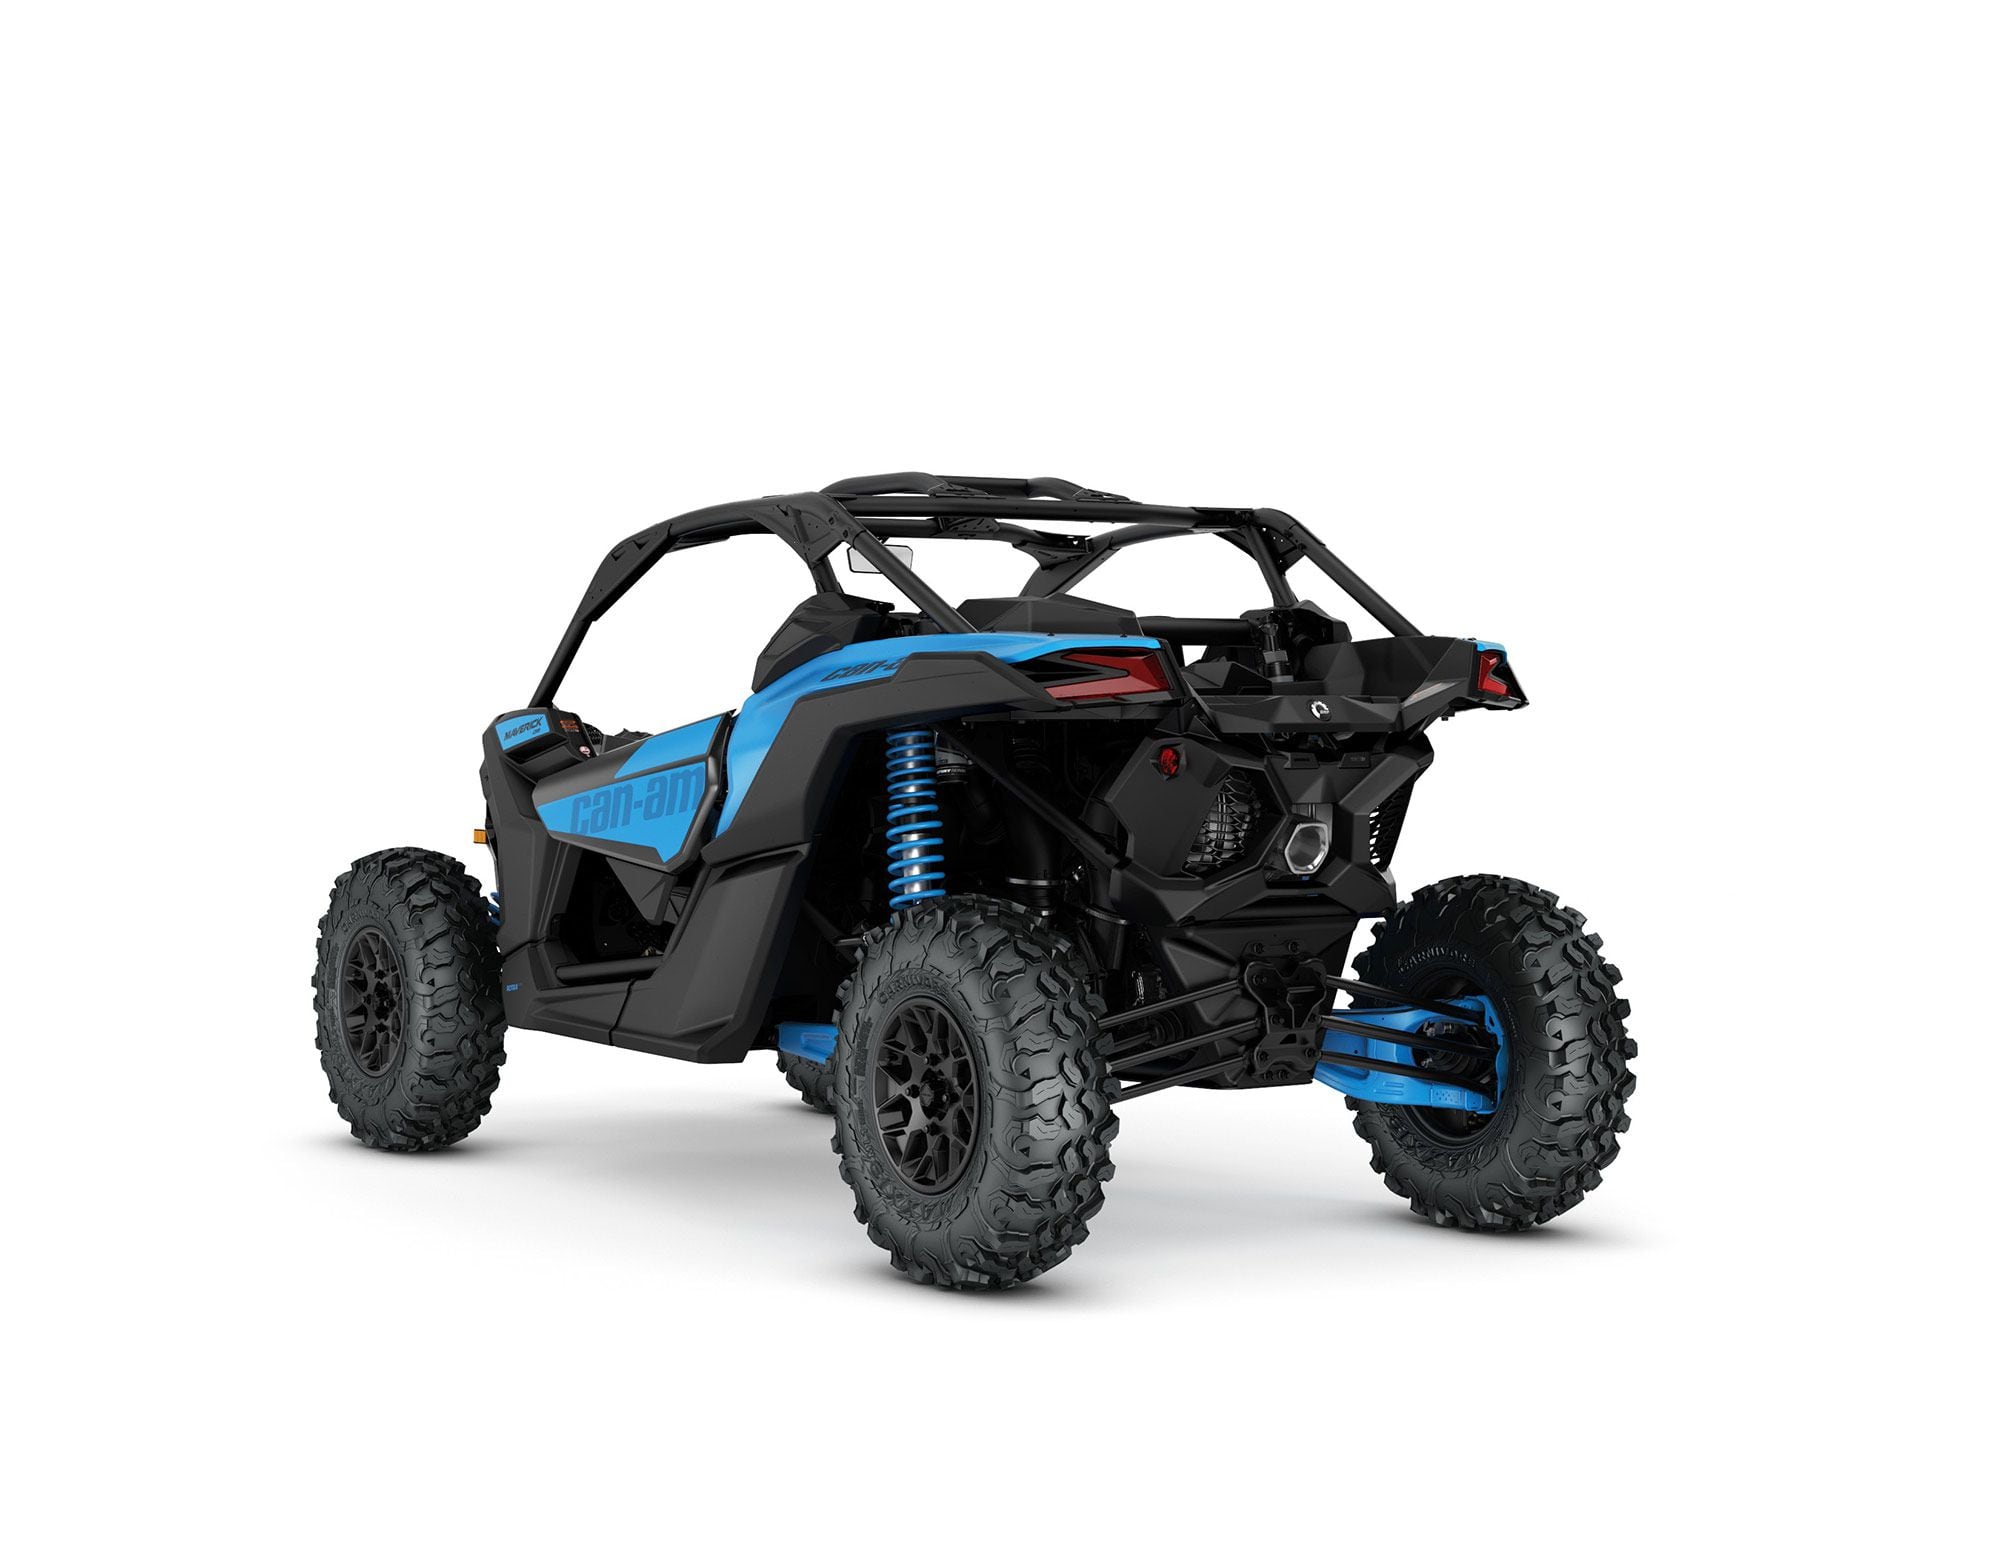 2022 Can-Am Maverick X3 DS Turbo rear view in Octane Blue color.